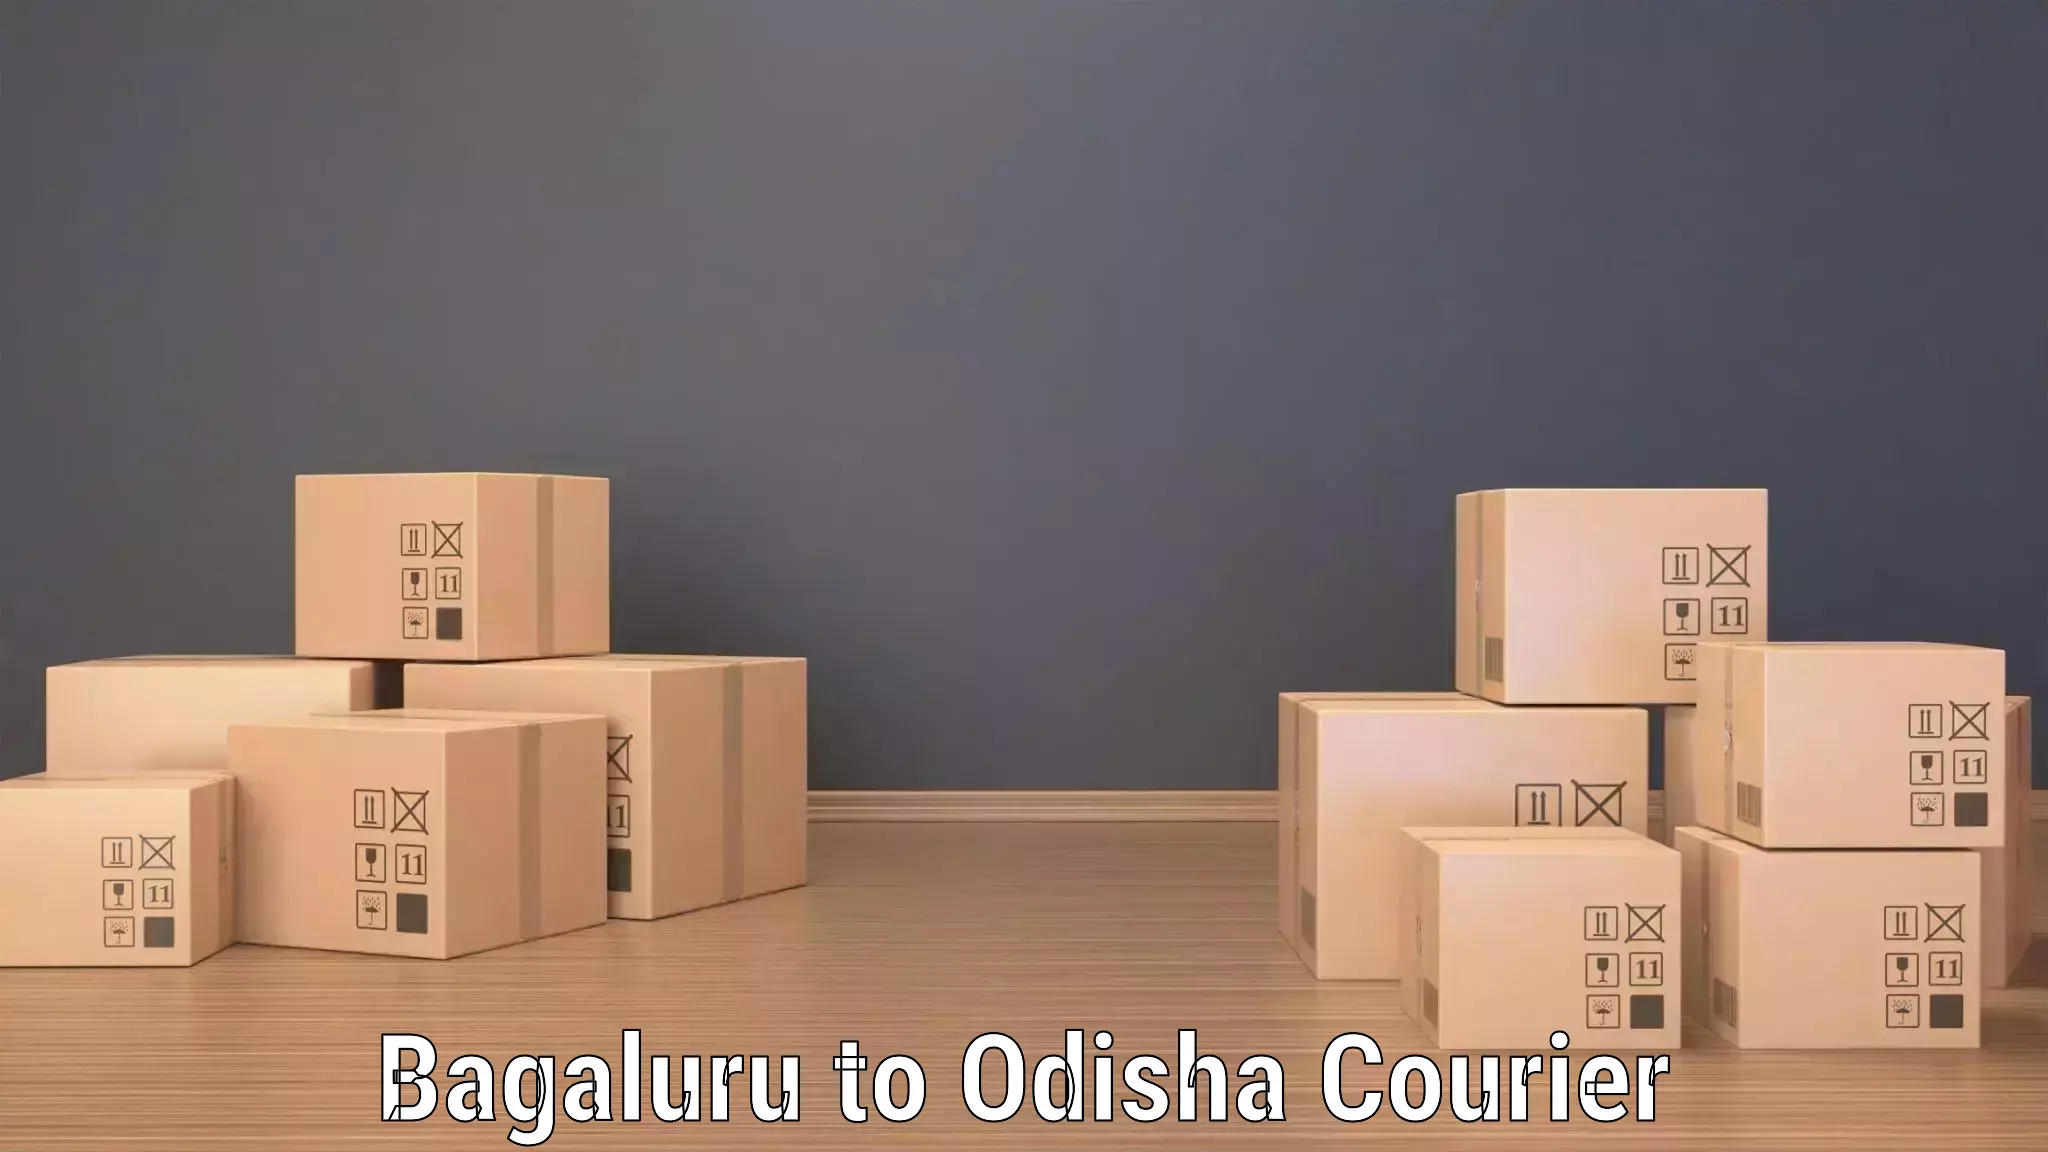 State-of-the-art courier technology Bagaluru to Chandbali